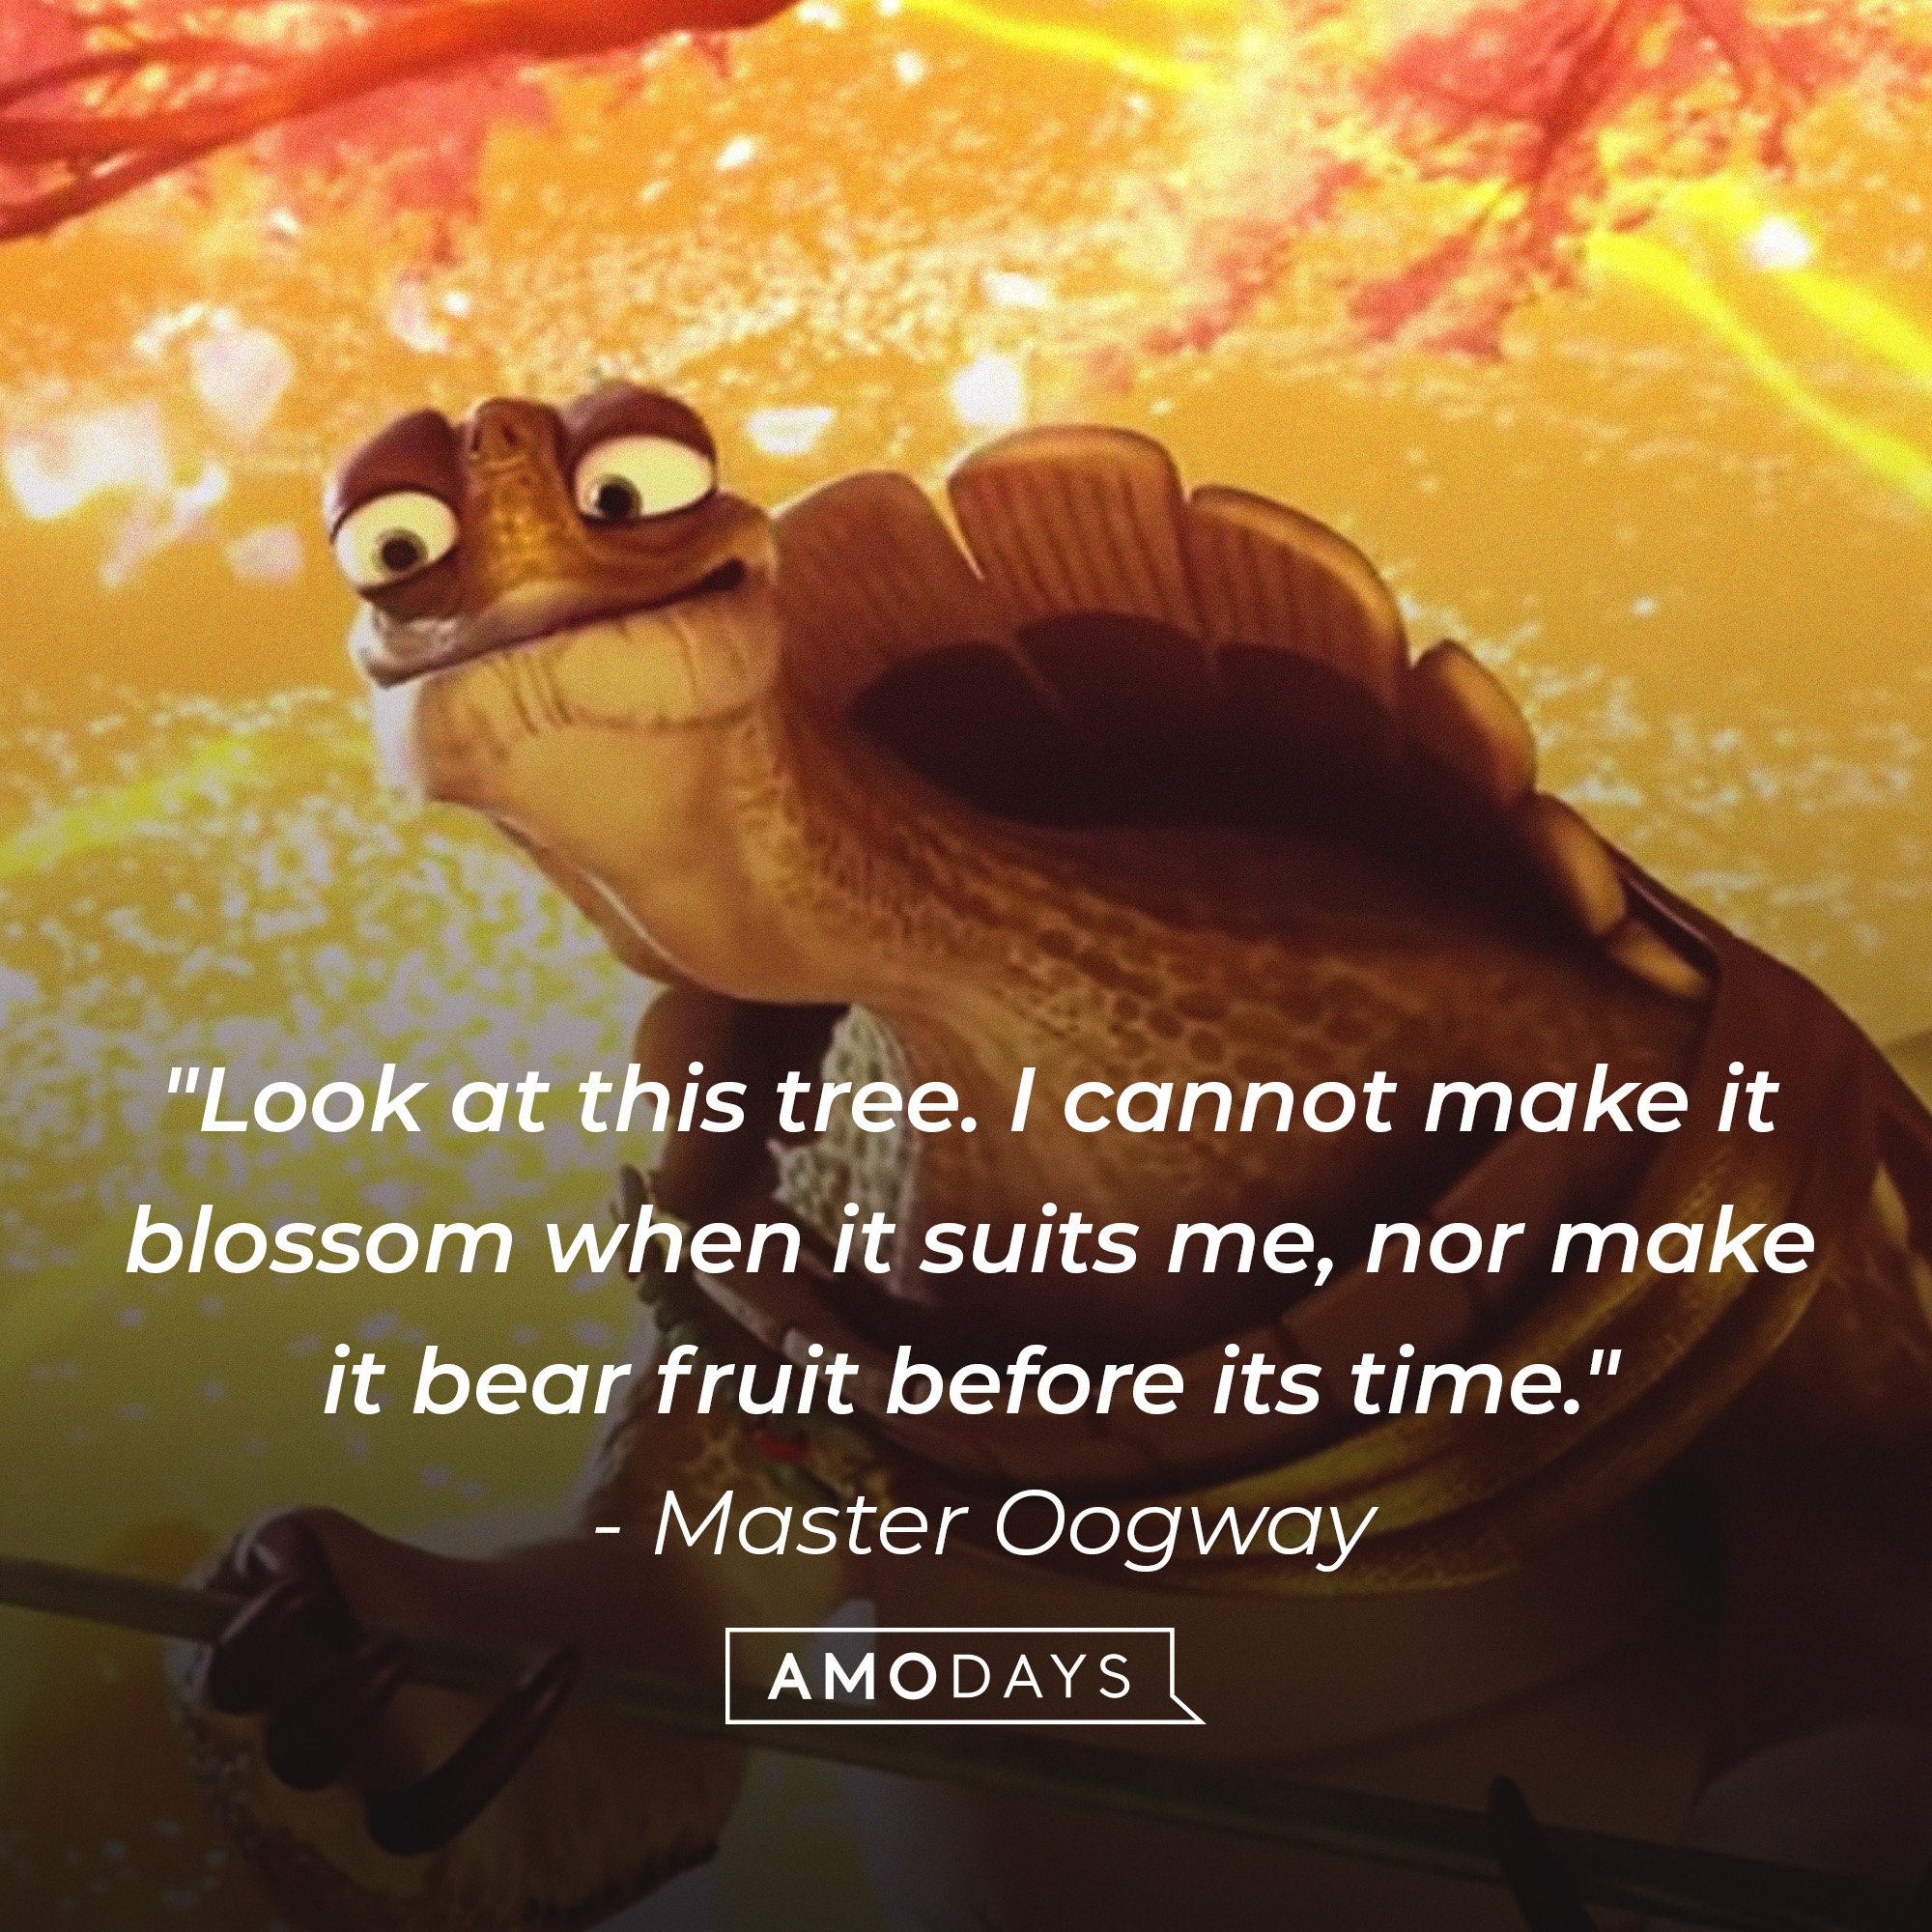 Master Oogway’s quote: "Look at this tree. I cannot make it blossom when it suits me, nor make it bear fruit before its time." | Image: AmoDays